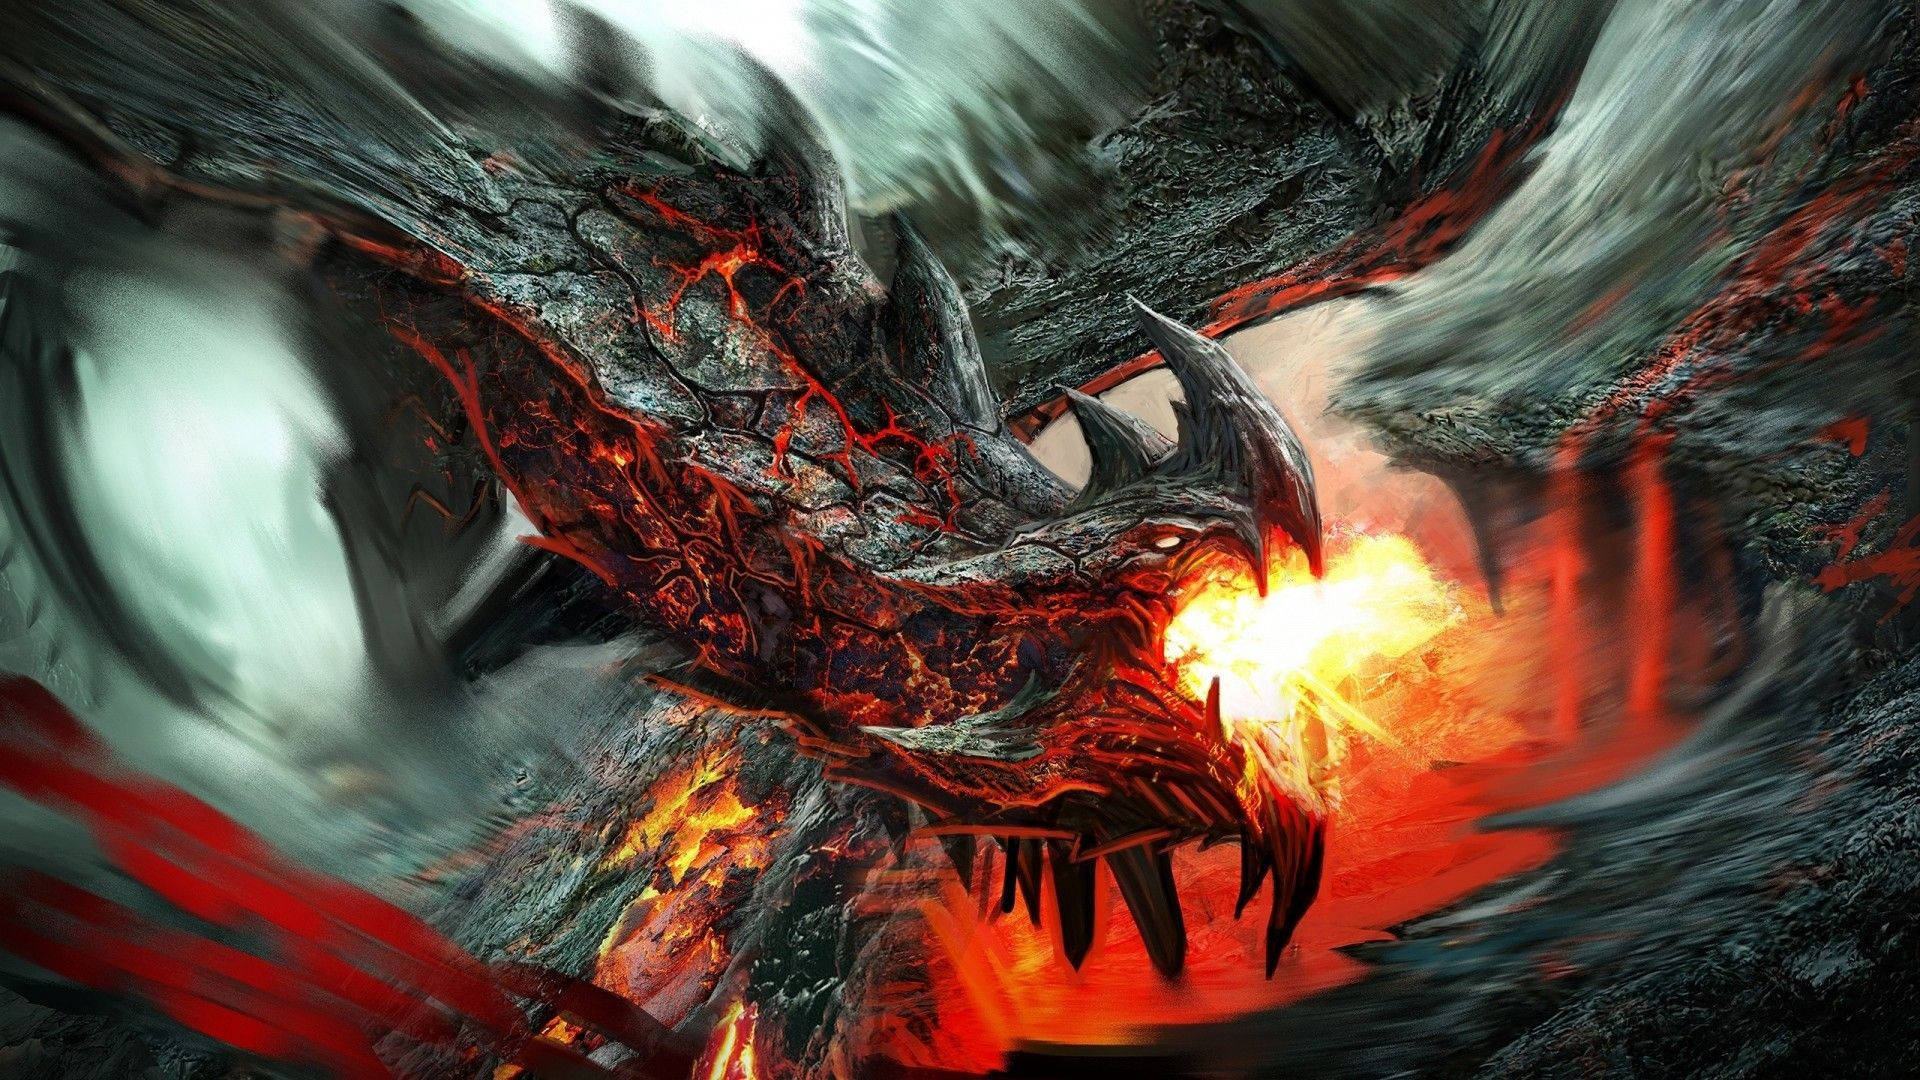 Coolest Dragon Breathing Volcanic Fire Wallpaper